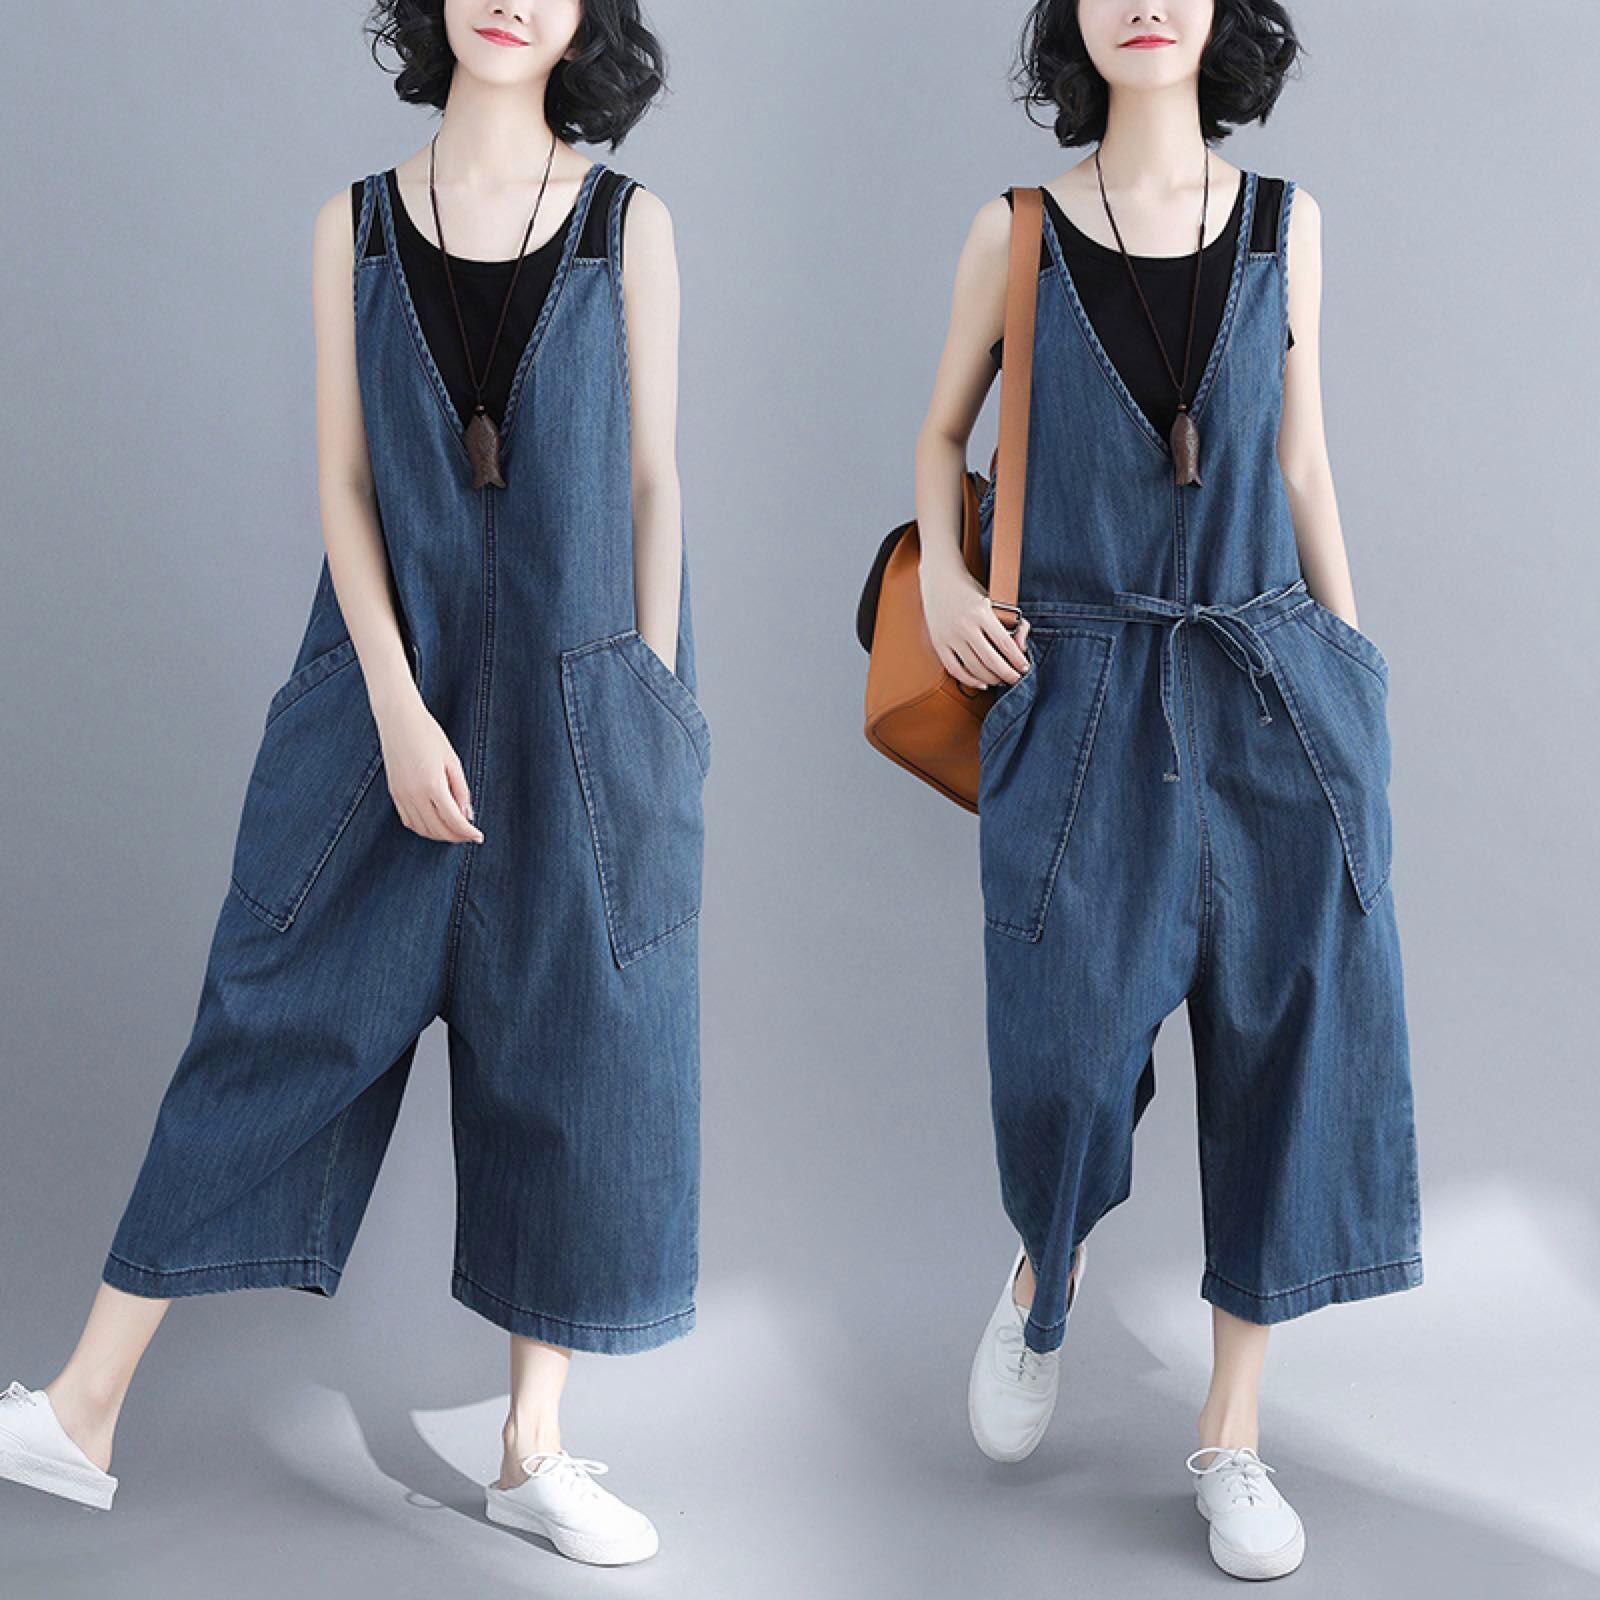 #4025 Spring Autumn V-neck Sleeveless Woman Jean Jumpsuit Solid Loose Overalls Ladise Fashion Wide Leg Big Size Jumpsuit Lady